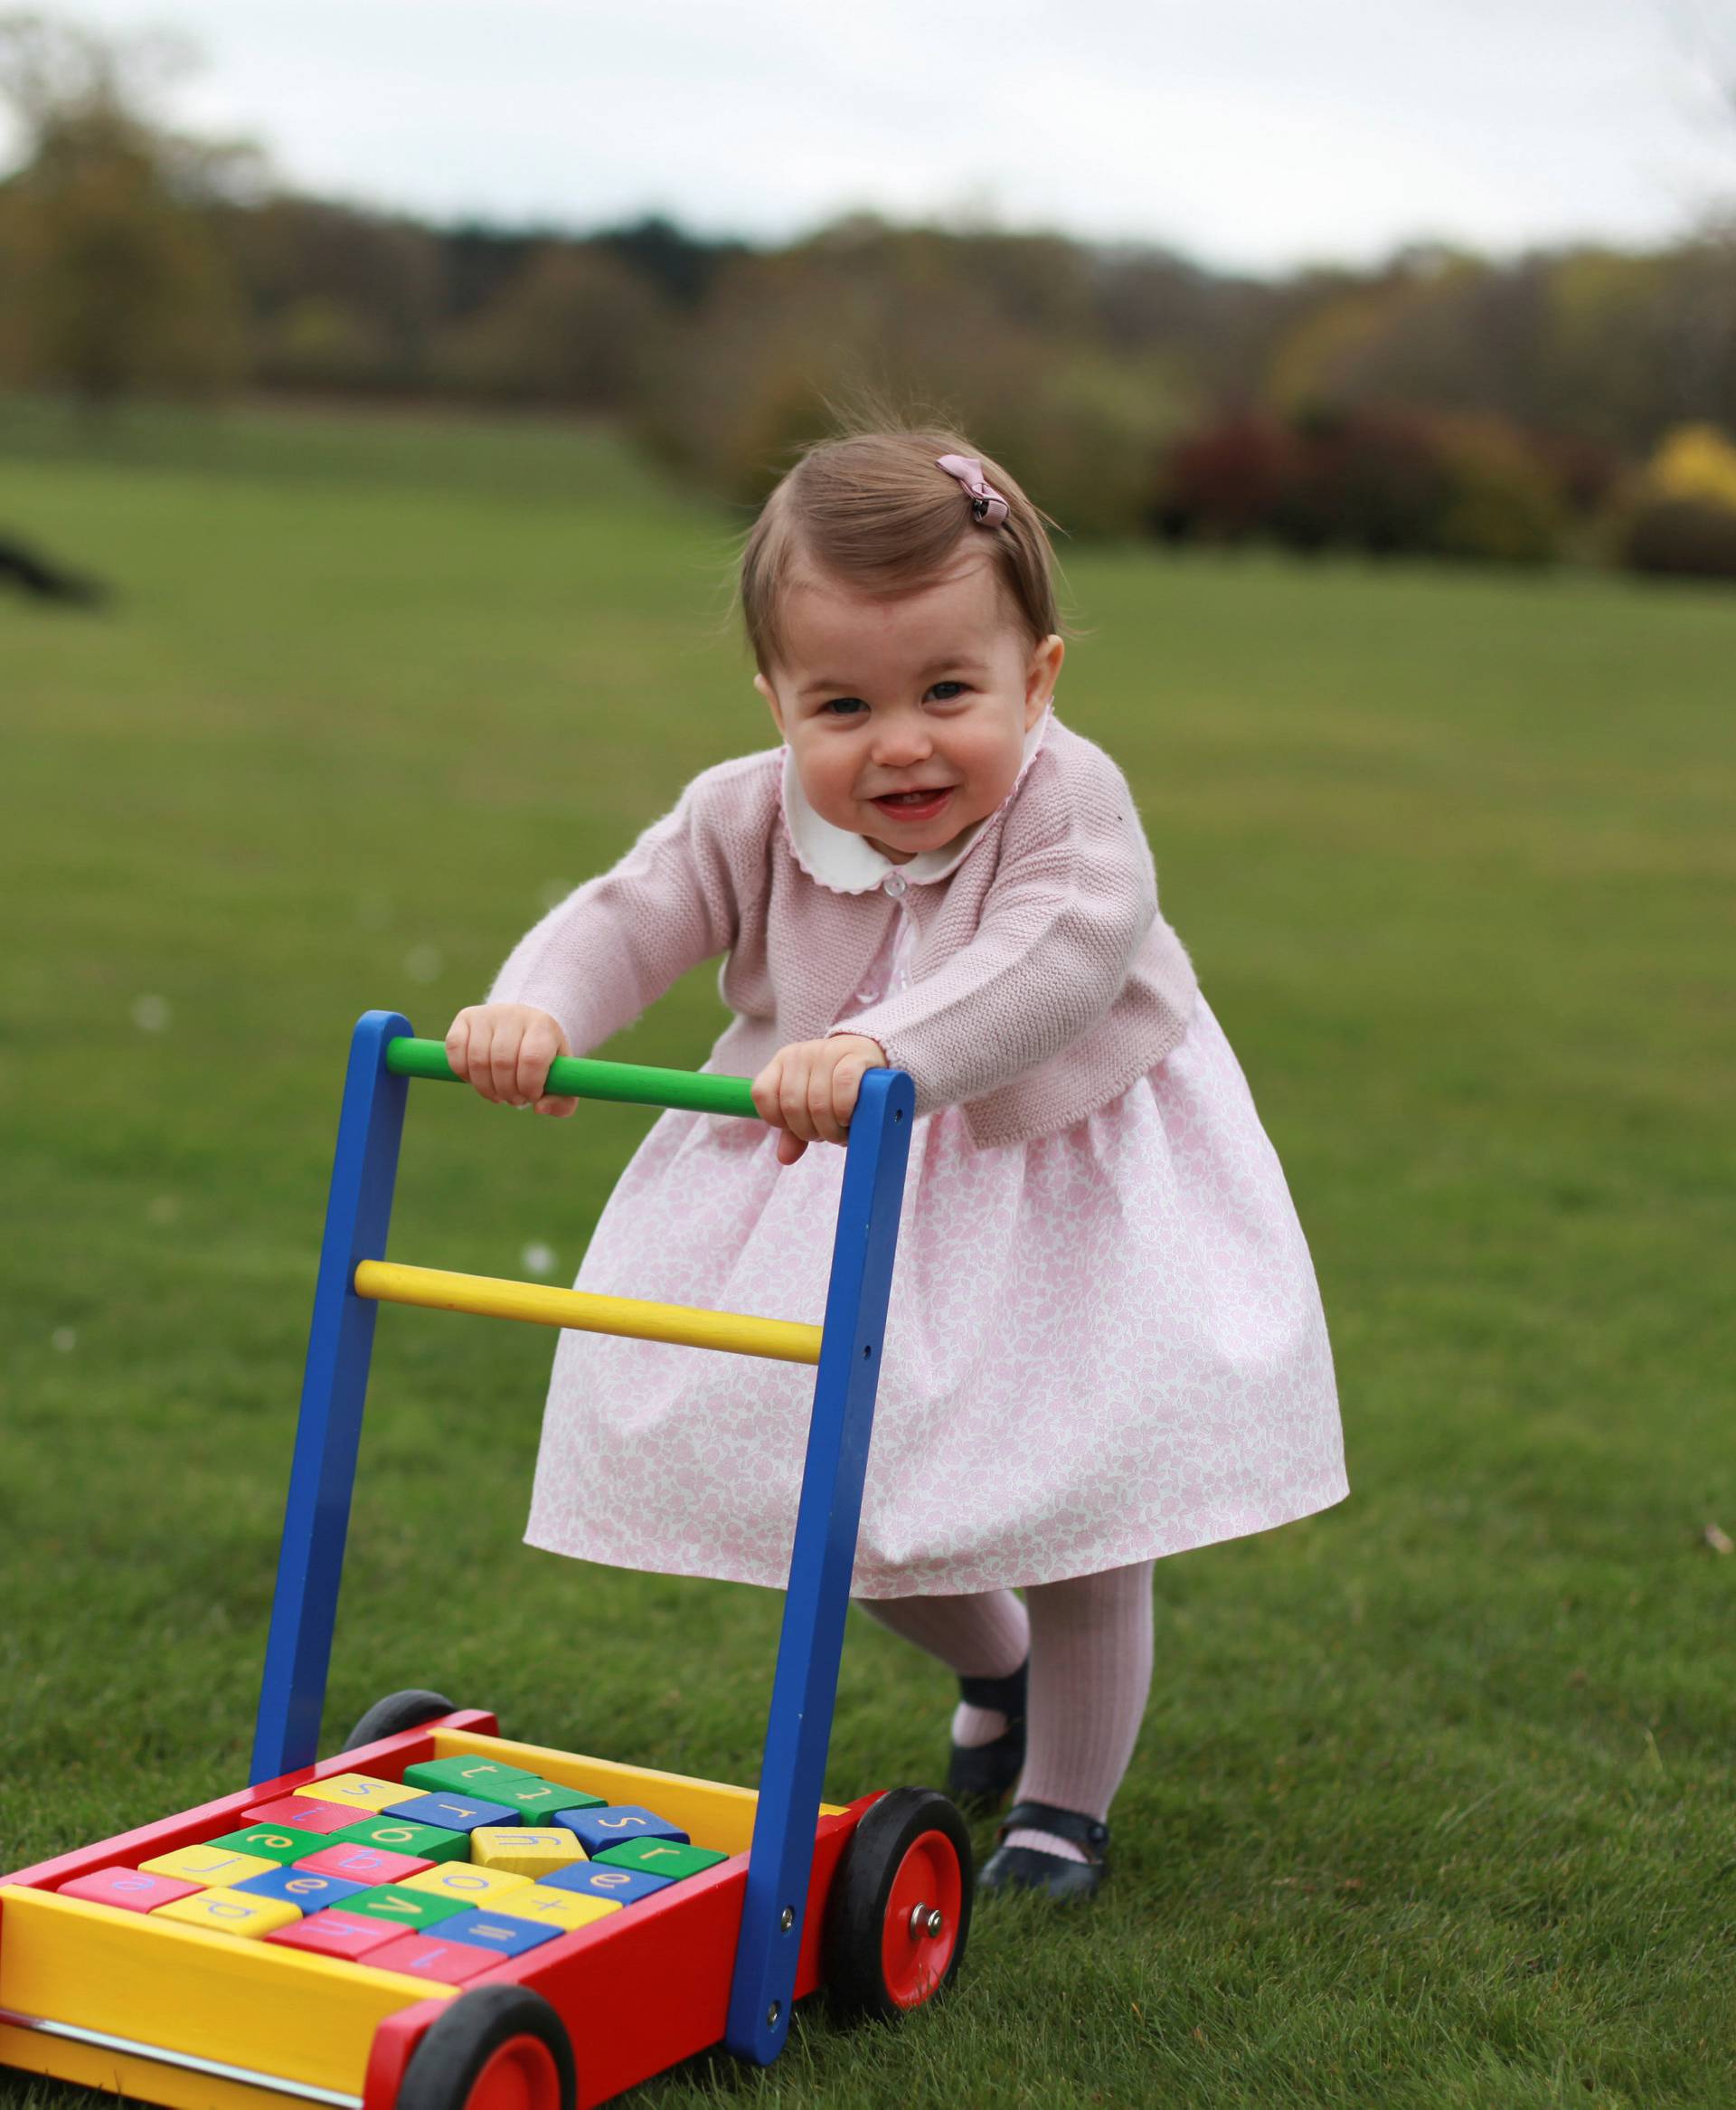 Britain's Princess Charlotte poses for a photograph in this undated photograph taken by her mother, Catherine, Duchess of Cambridge, at Anmer Hall in Norfolk